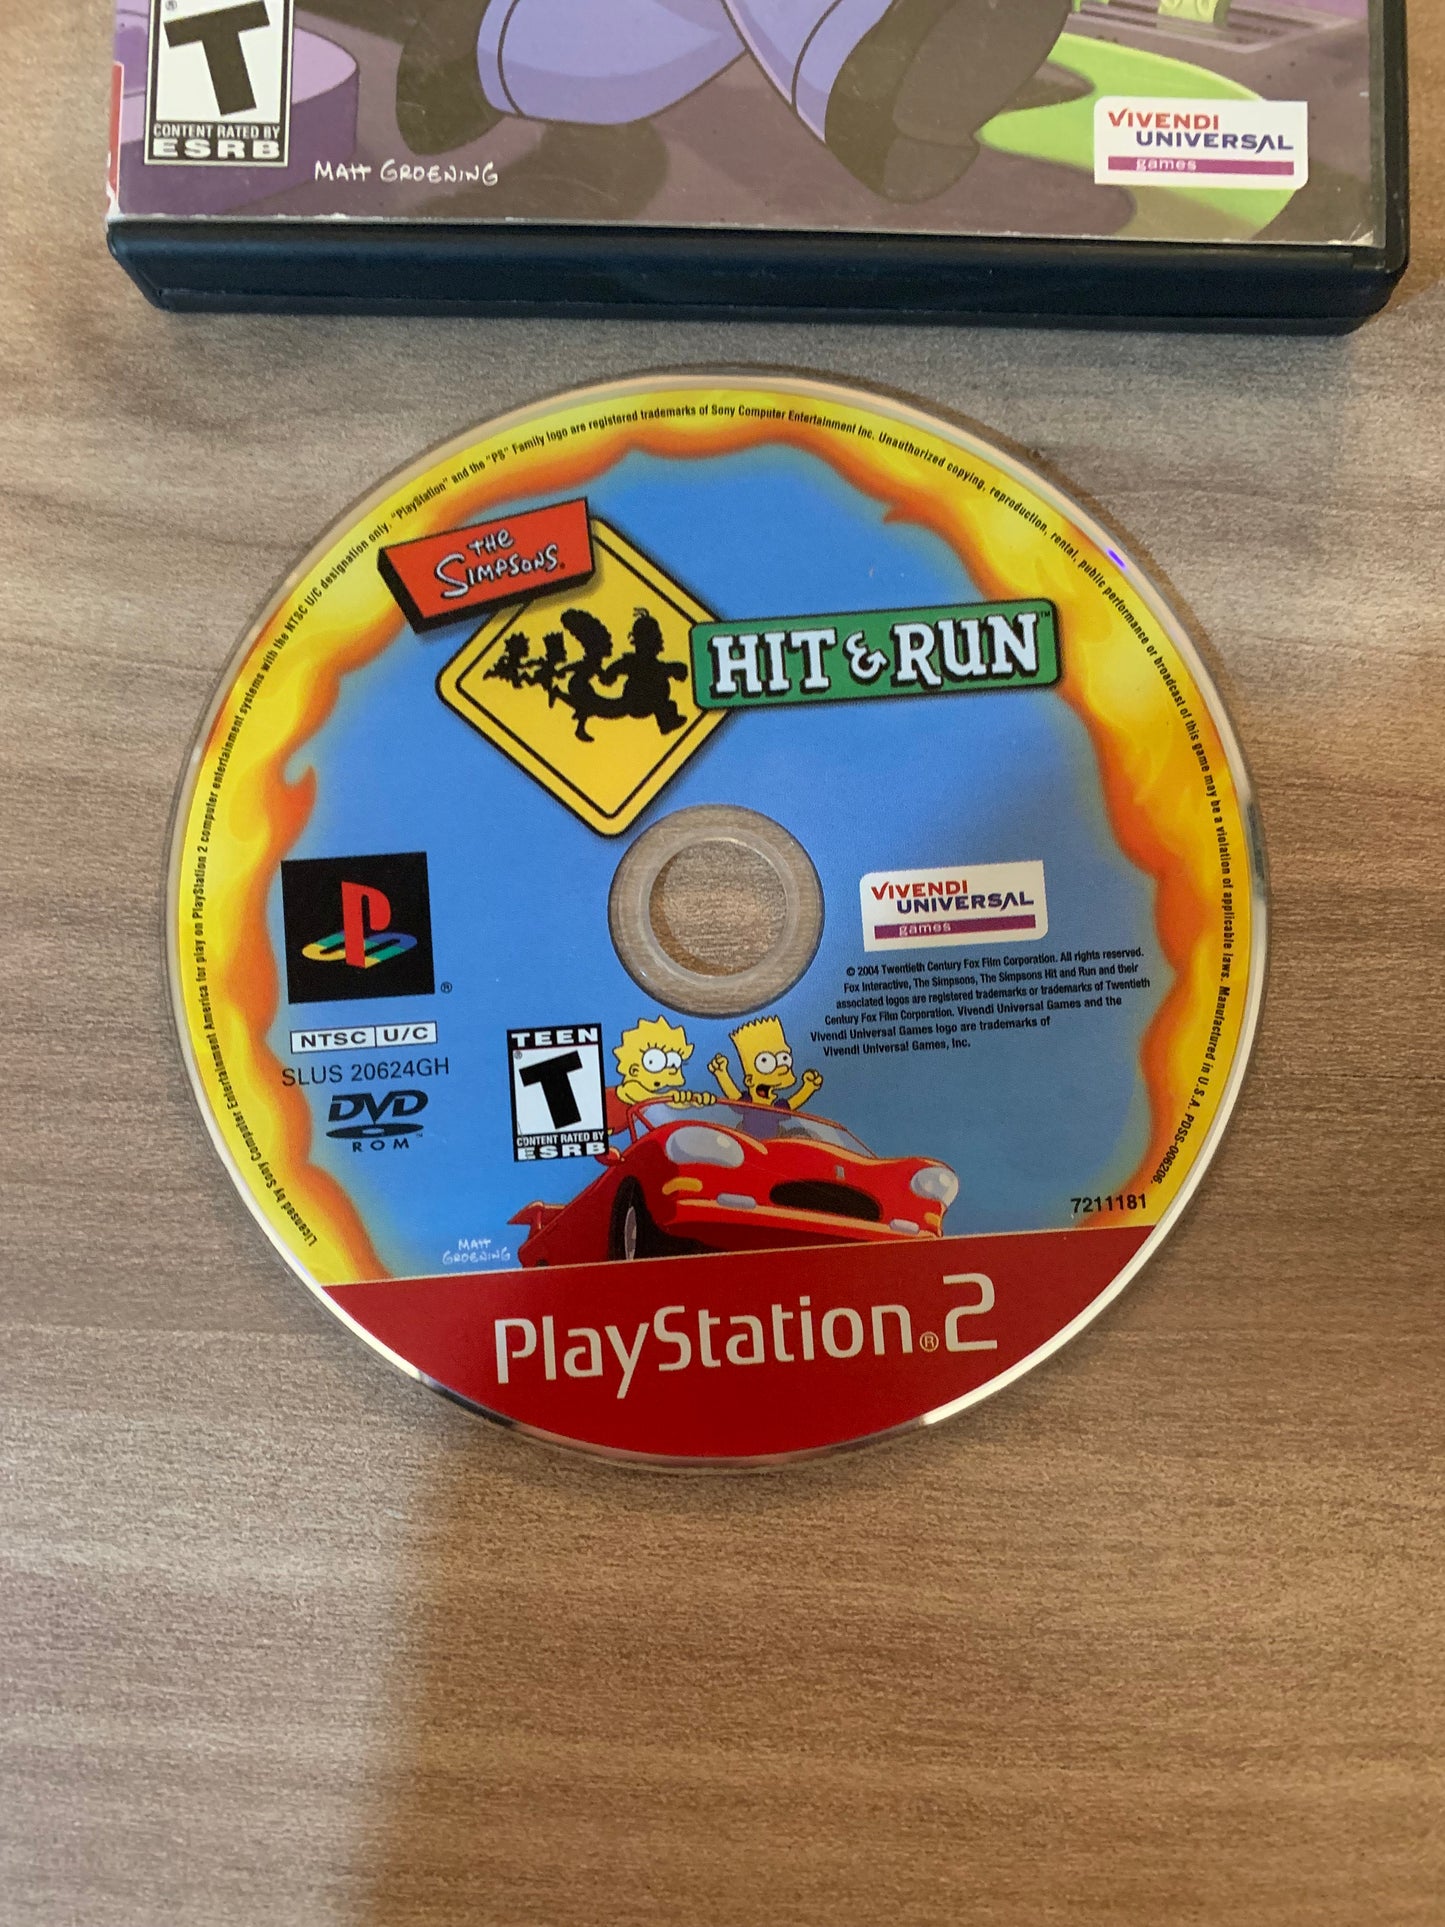 SONY PLAYSTATiON 2 [PS2] | THE SiMPSONS HiT & RUN | GREATEST HiTS